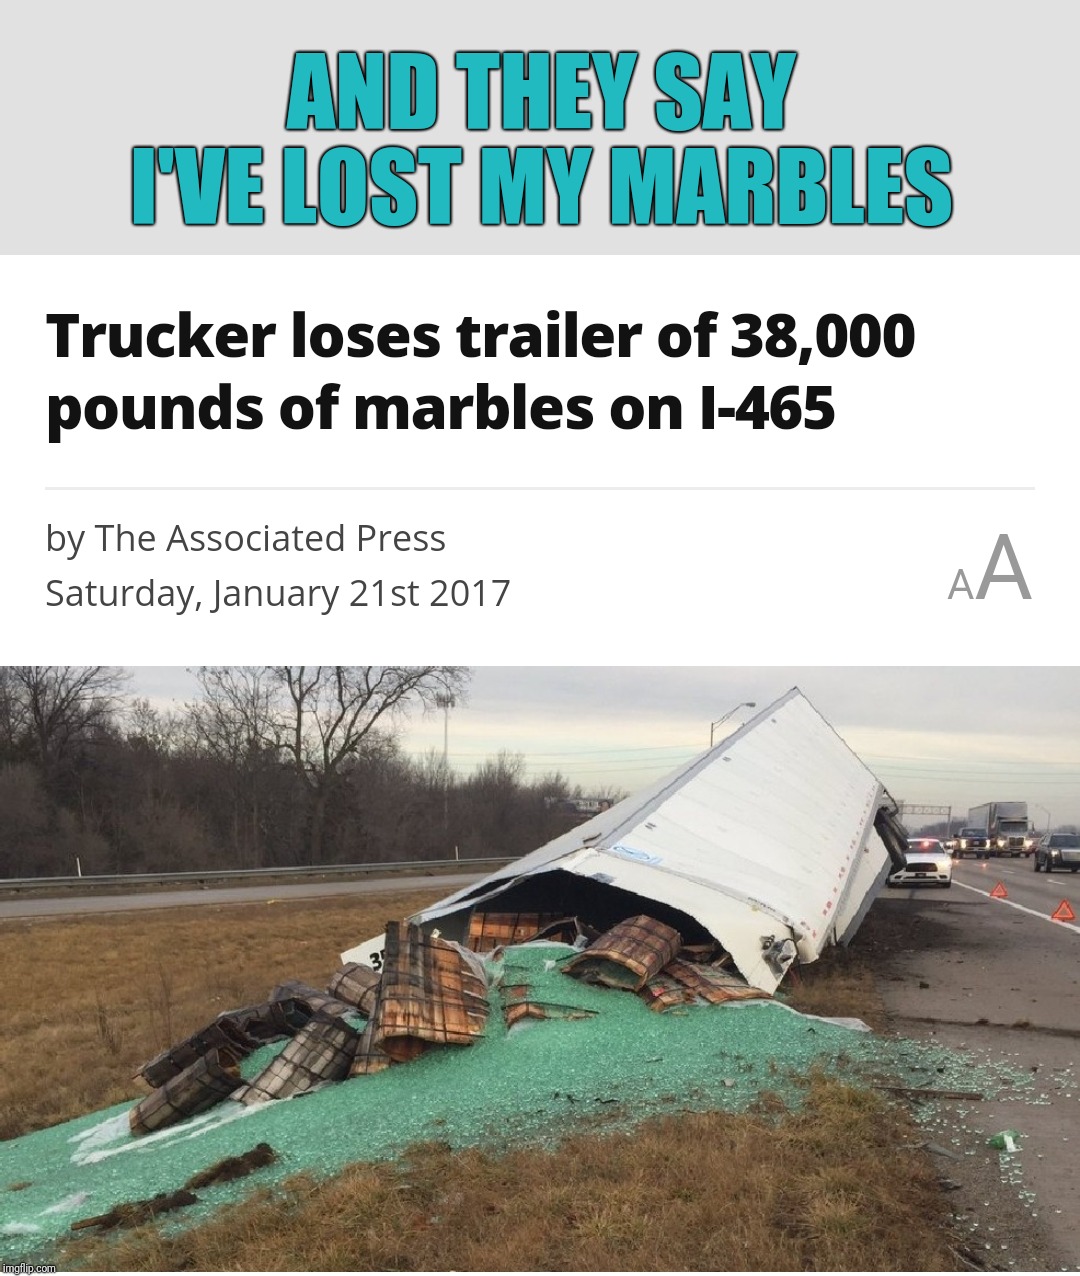 spilled marbles - And They Say I'Ve Lost My Marbles Trucker loses trailer of 38,000 pounds of marbles on 1465 by The Associated Press Saturday, January 21st 2017 imgflip.com